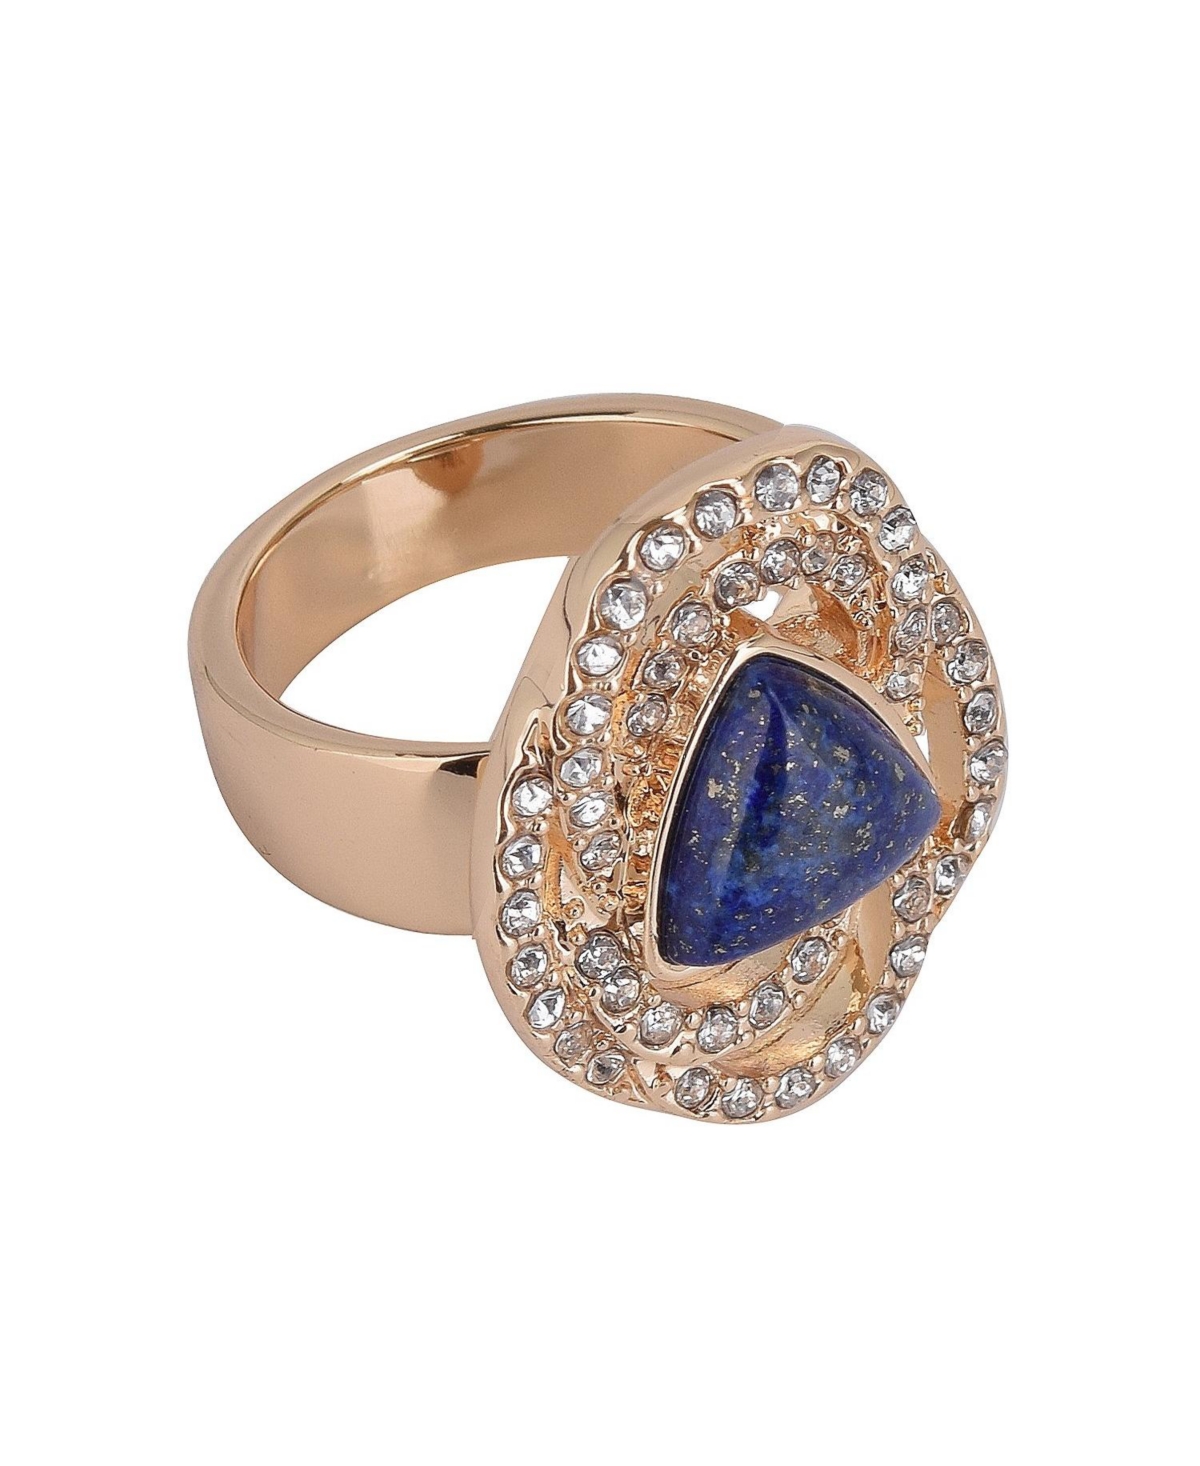 Gold Tone and Sodalite Crystal Stone and Semi-Precious Stone Cocktail Ring - Blue